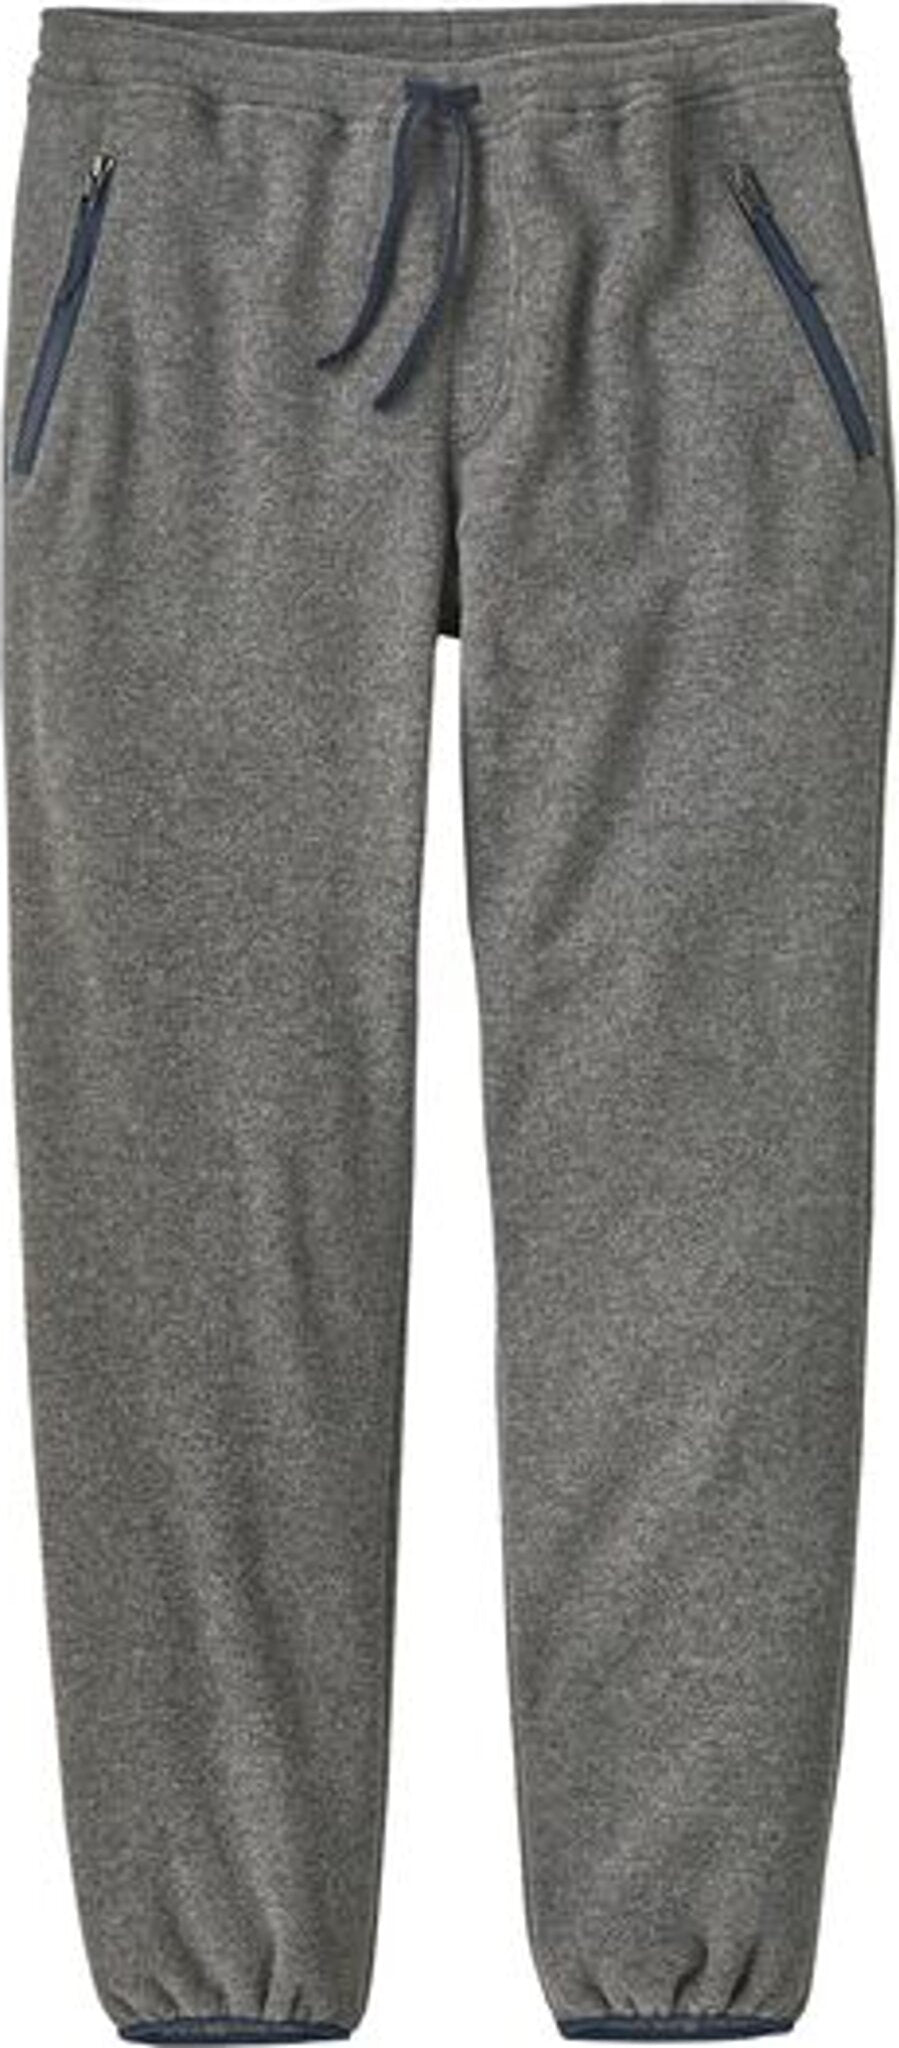 Patagonia Jogger Athletic Pants for Women